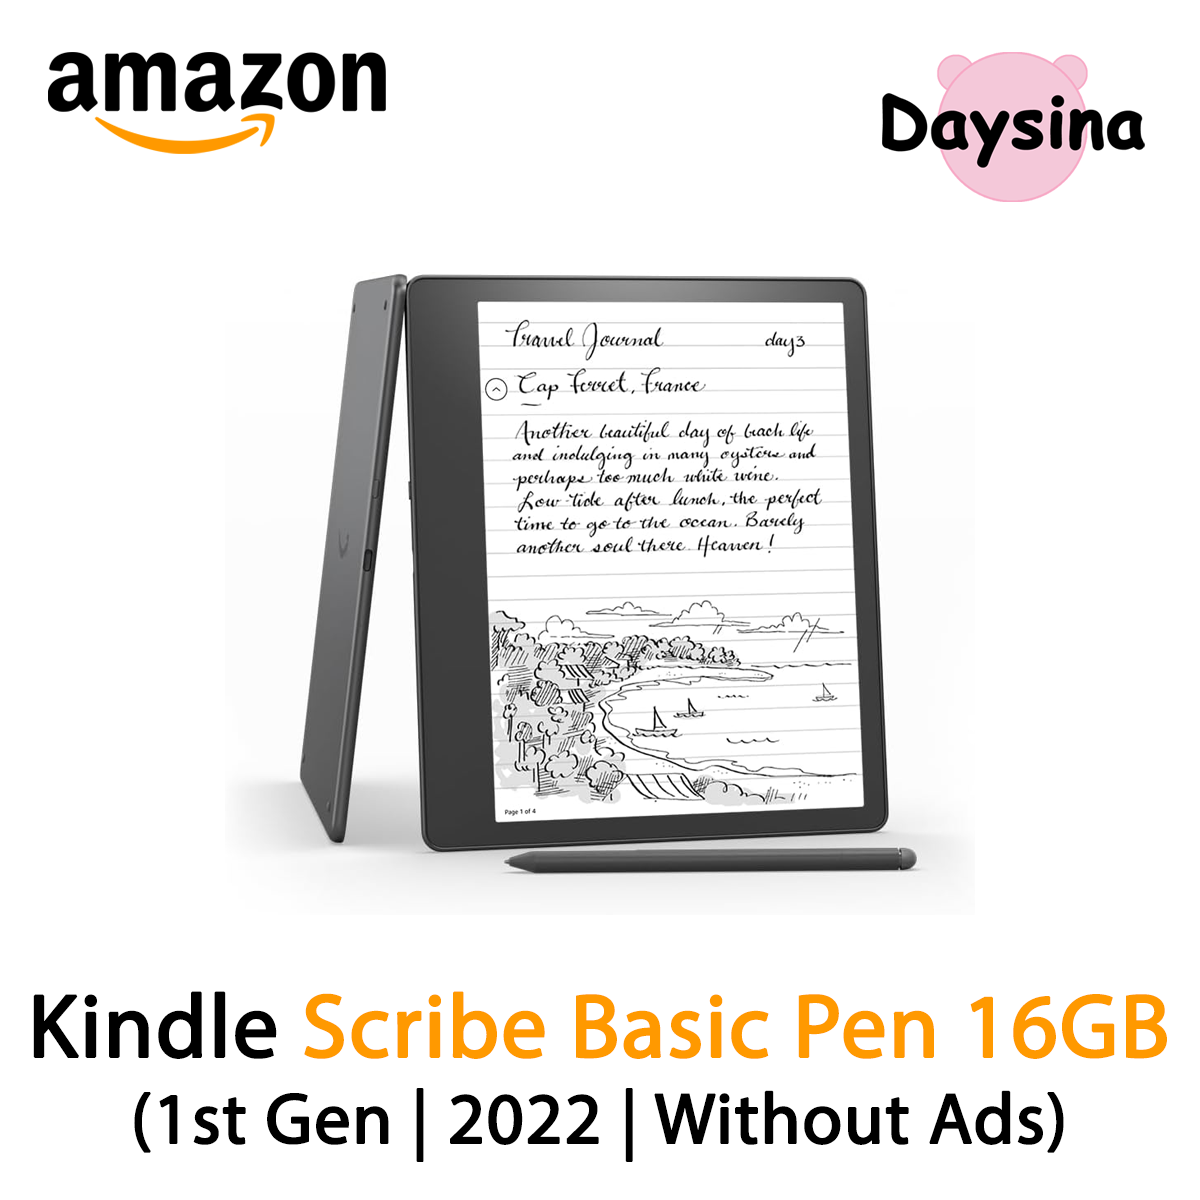 Kindle Scribe (64 GB) the first Kindle and digital notebook, all in  one, with a 10.2” 300 ppi Paperwhite display, includes Premium Pen